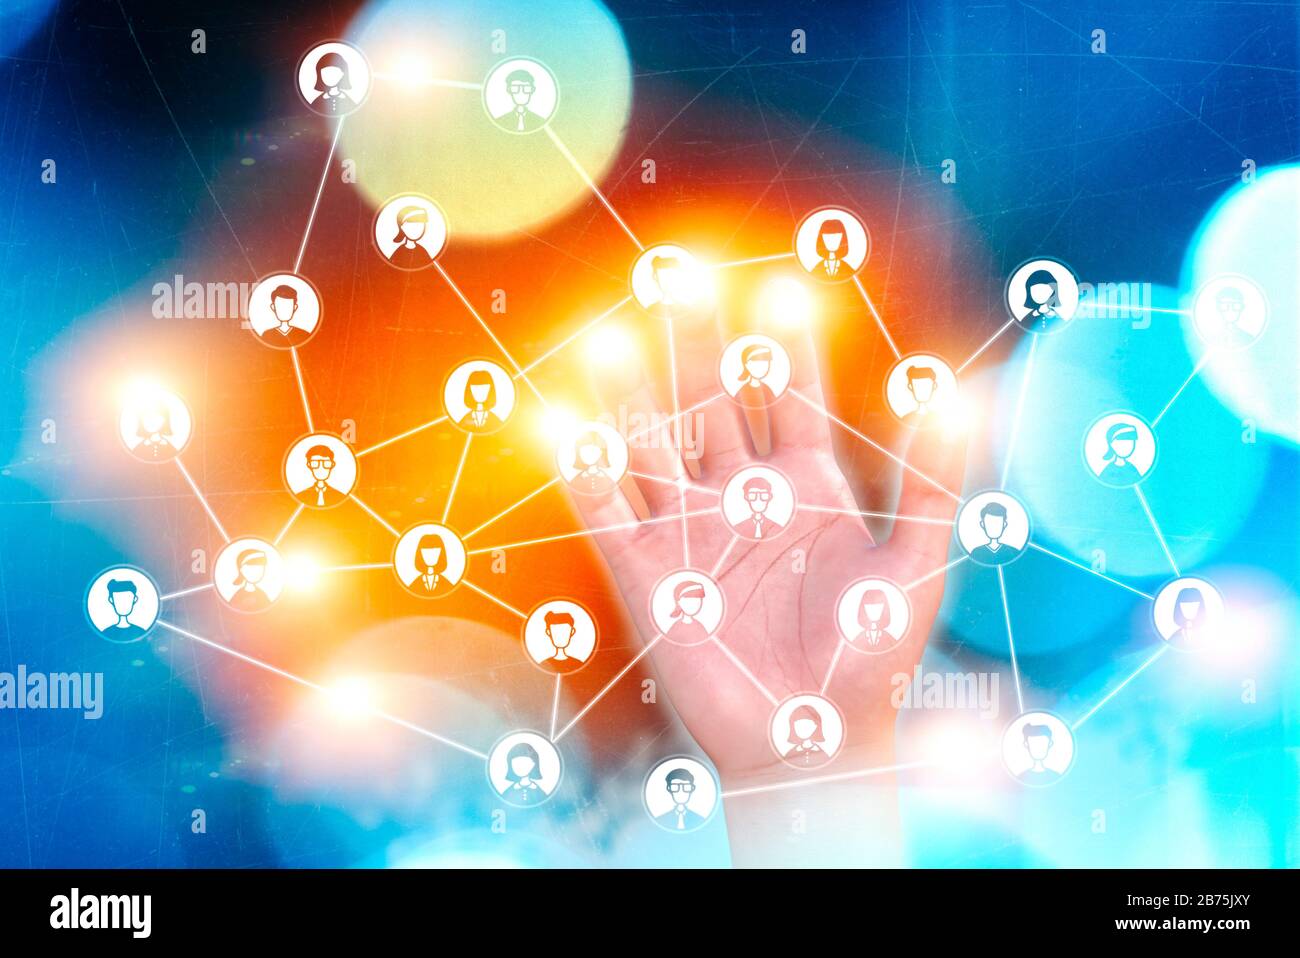 Social networks, online friendships, people contacts, followers. HUD, holograms. Internet connections. Network and contacts, corporate network Stock Photo